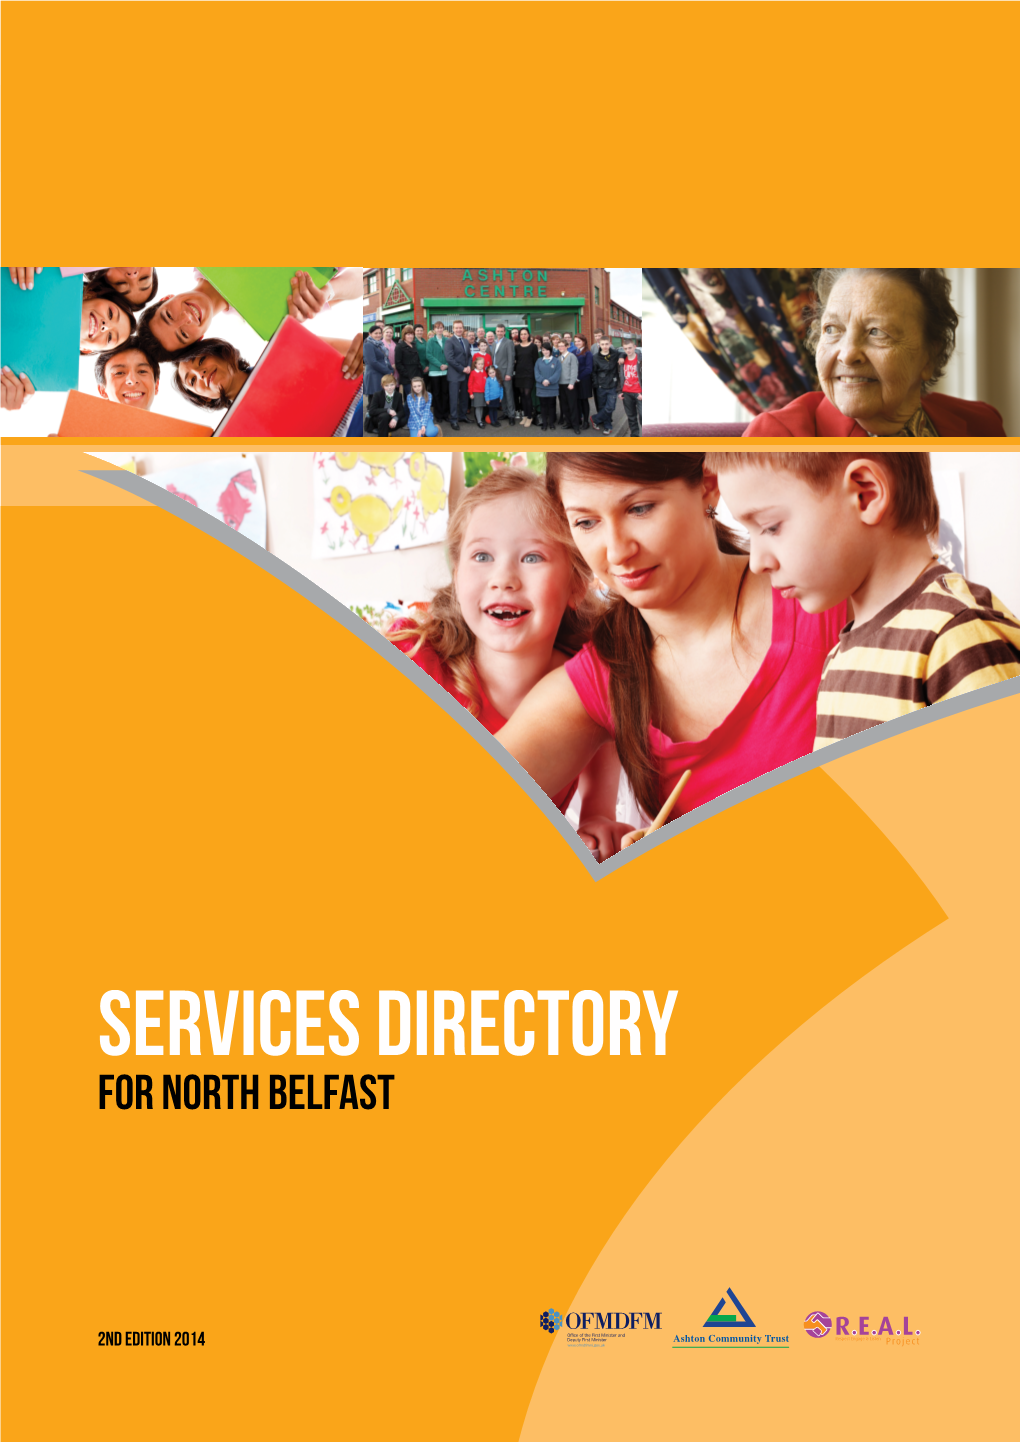 Services Directory for North Belfast